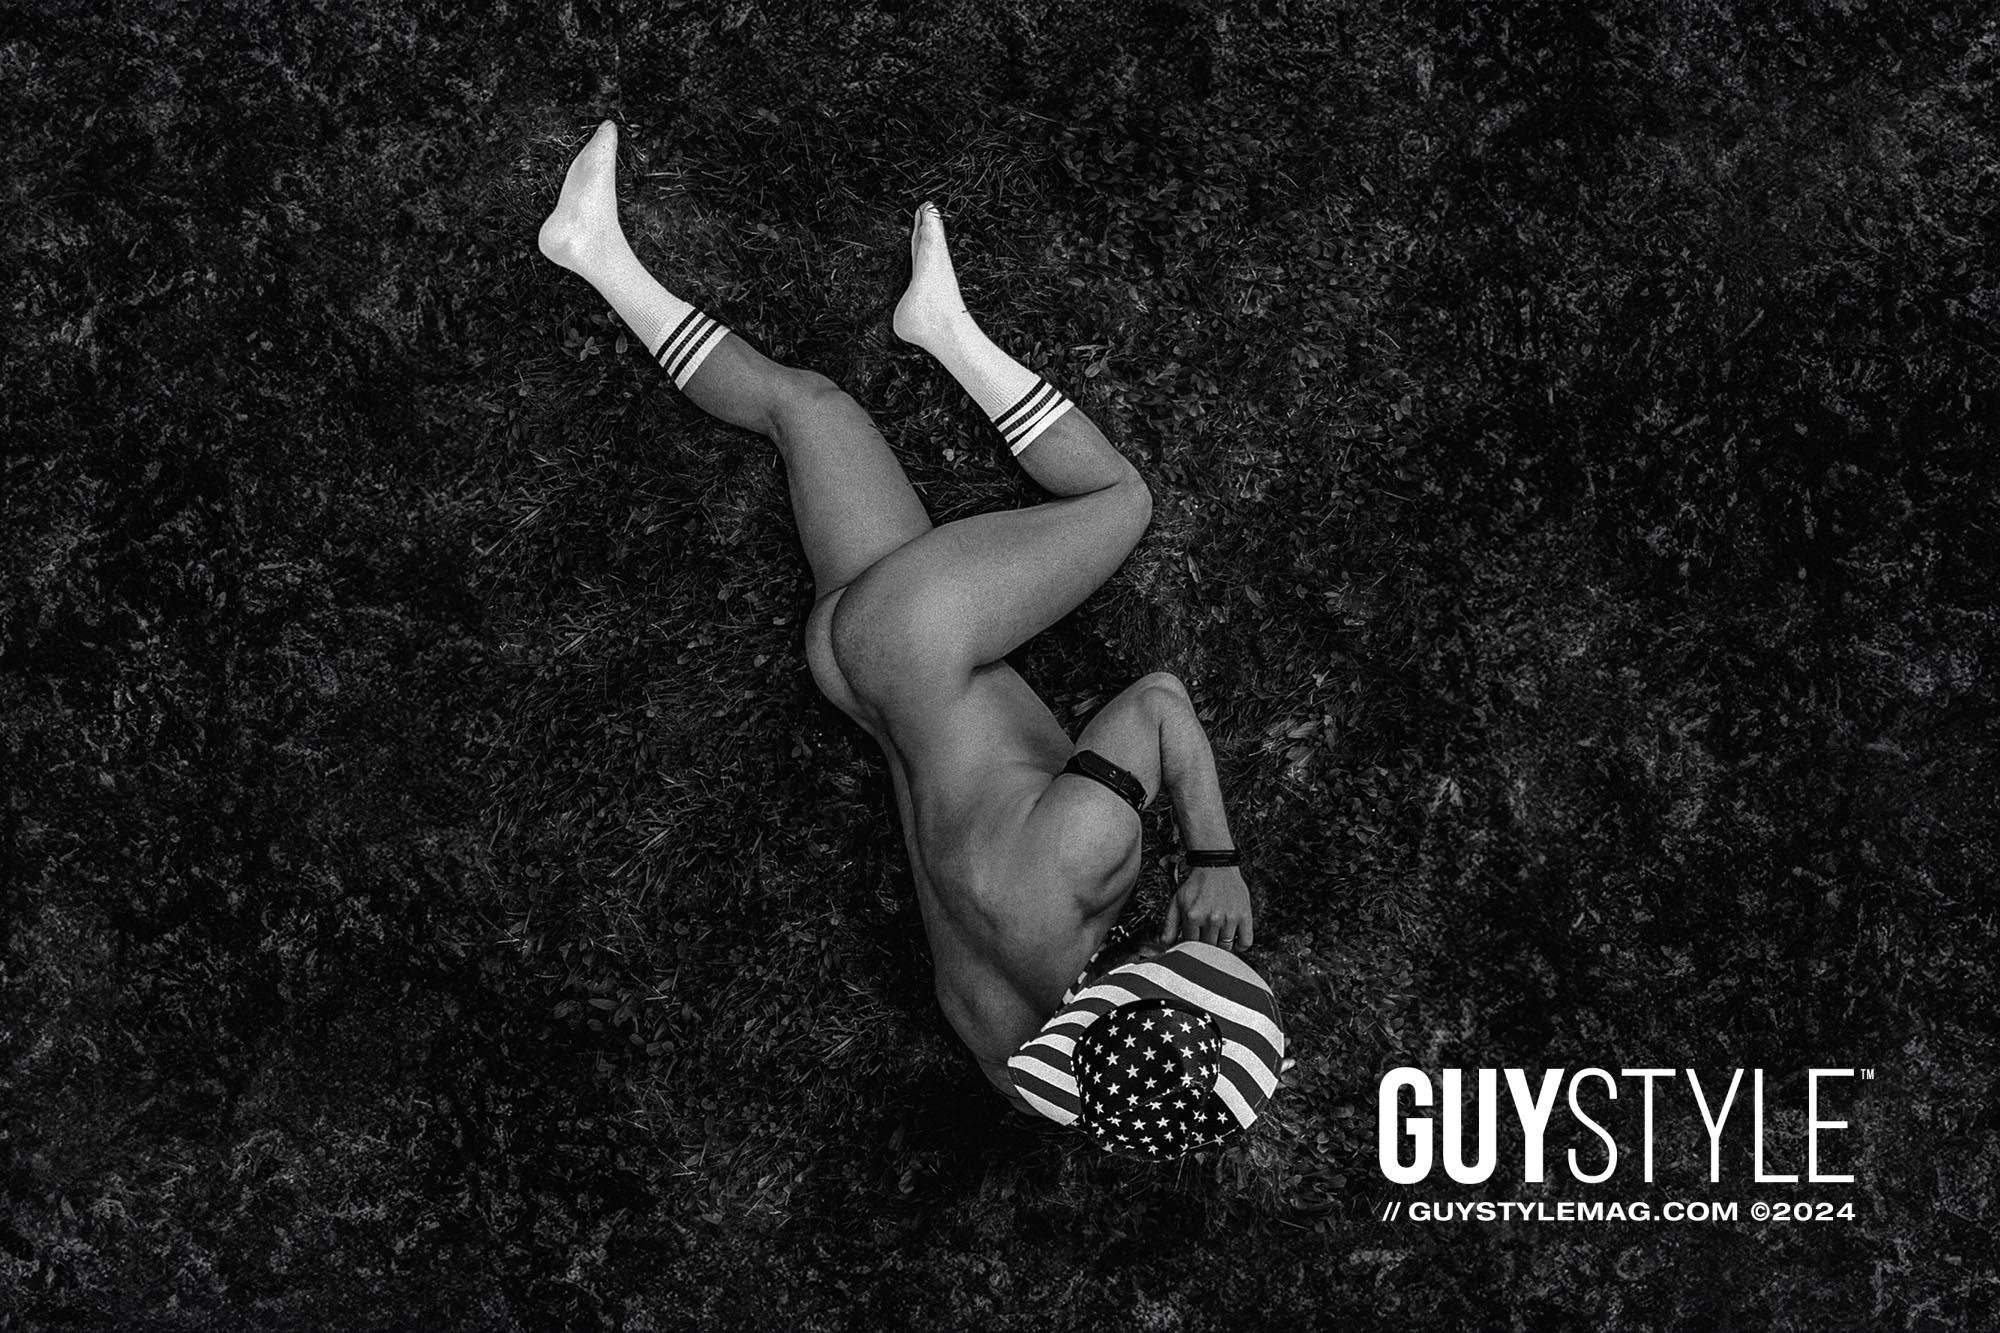 Into the Wild: The Art of Male Boudoir in "American Wilderness: Untamed" Photoshoot with Maxwell Alexander – Presented by Duncan Avenue Studios